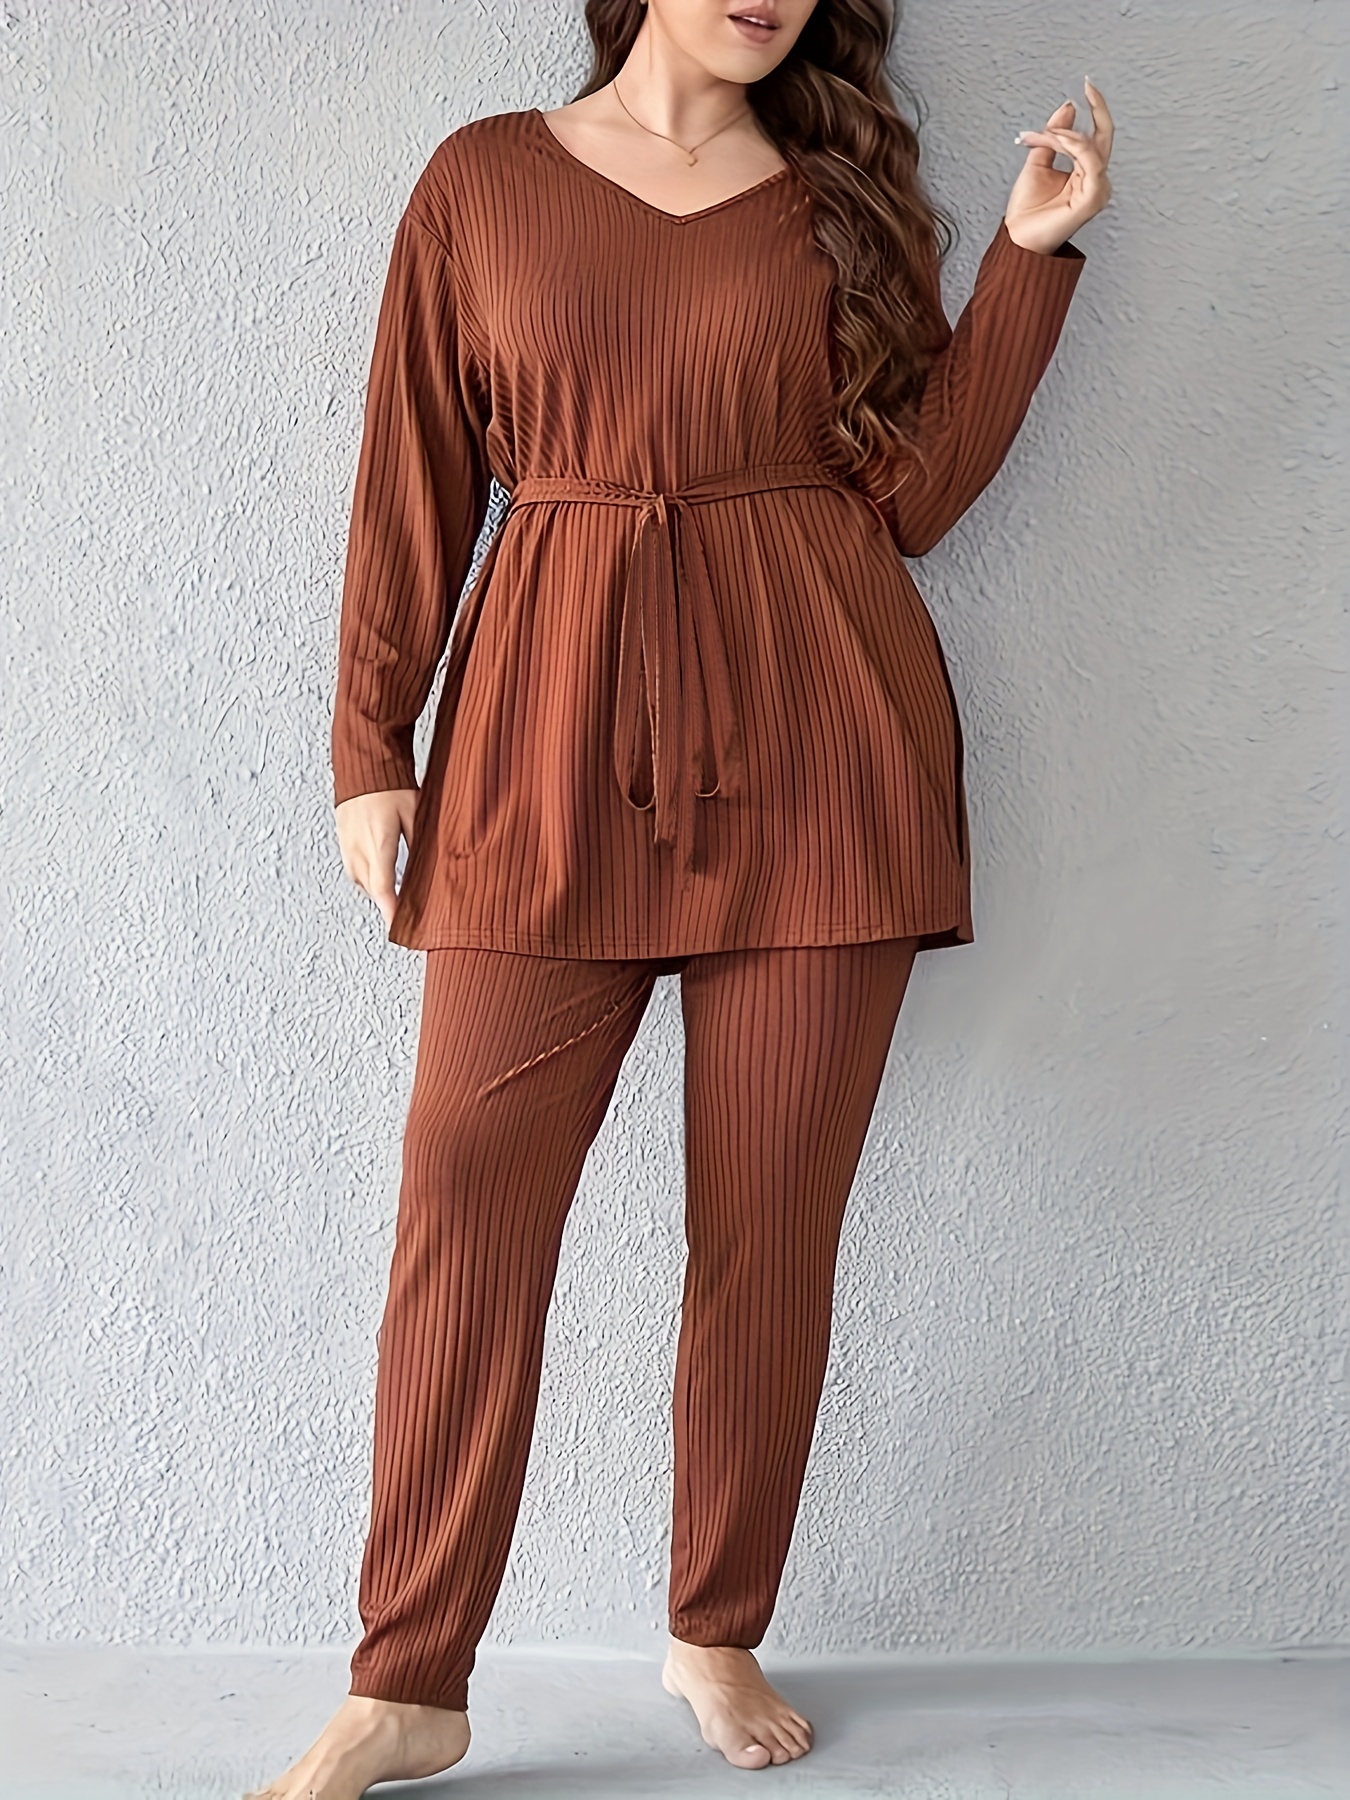 Plus Size Casual Loungewear Set, Women's Plus Solid Ribbed Knit Long Sleeve  V Neck Top With Belt & Pants Pajama Two Piece Set